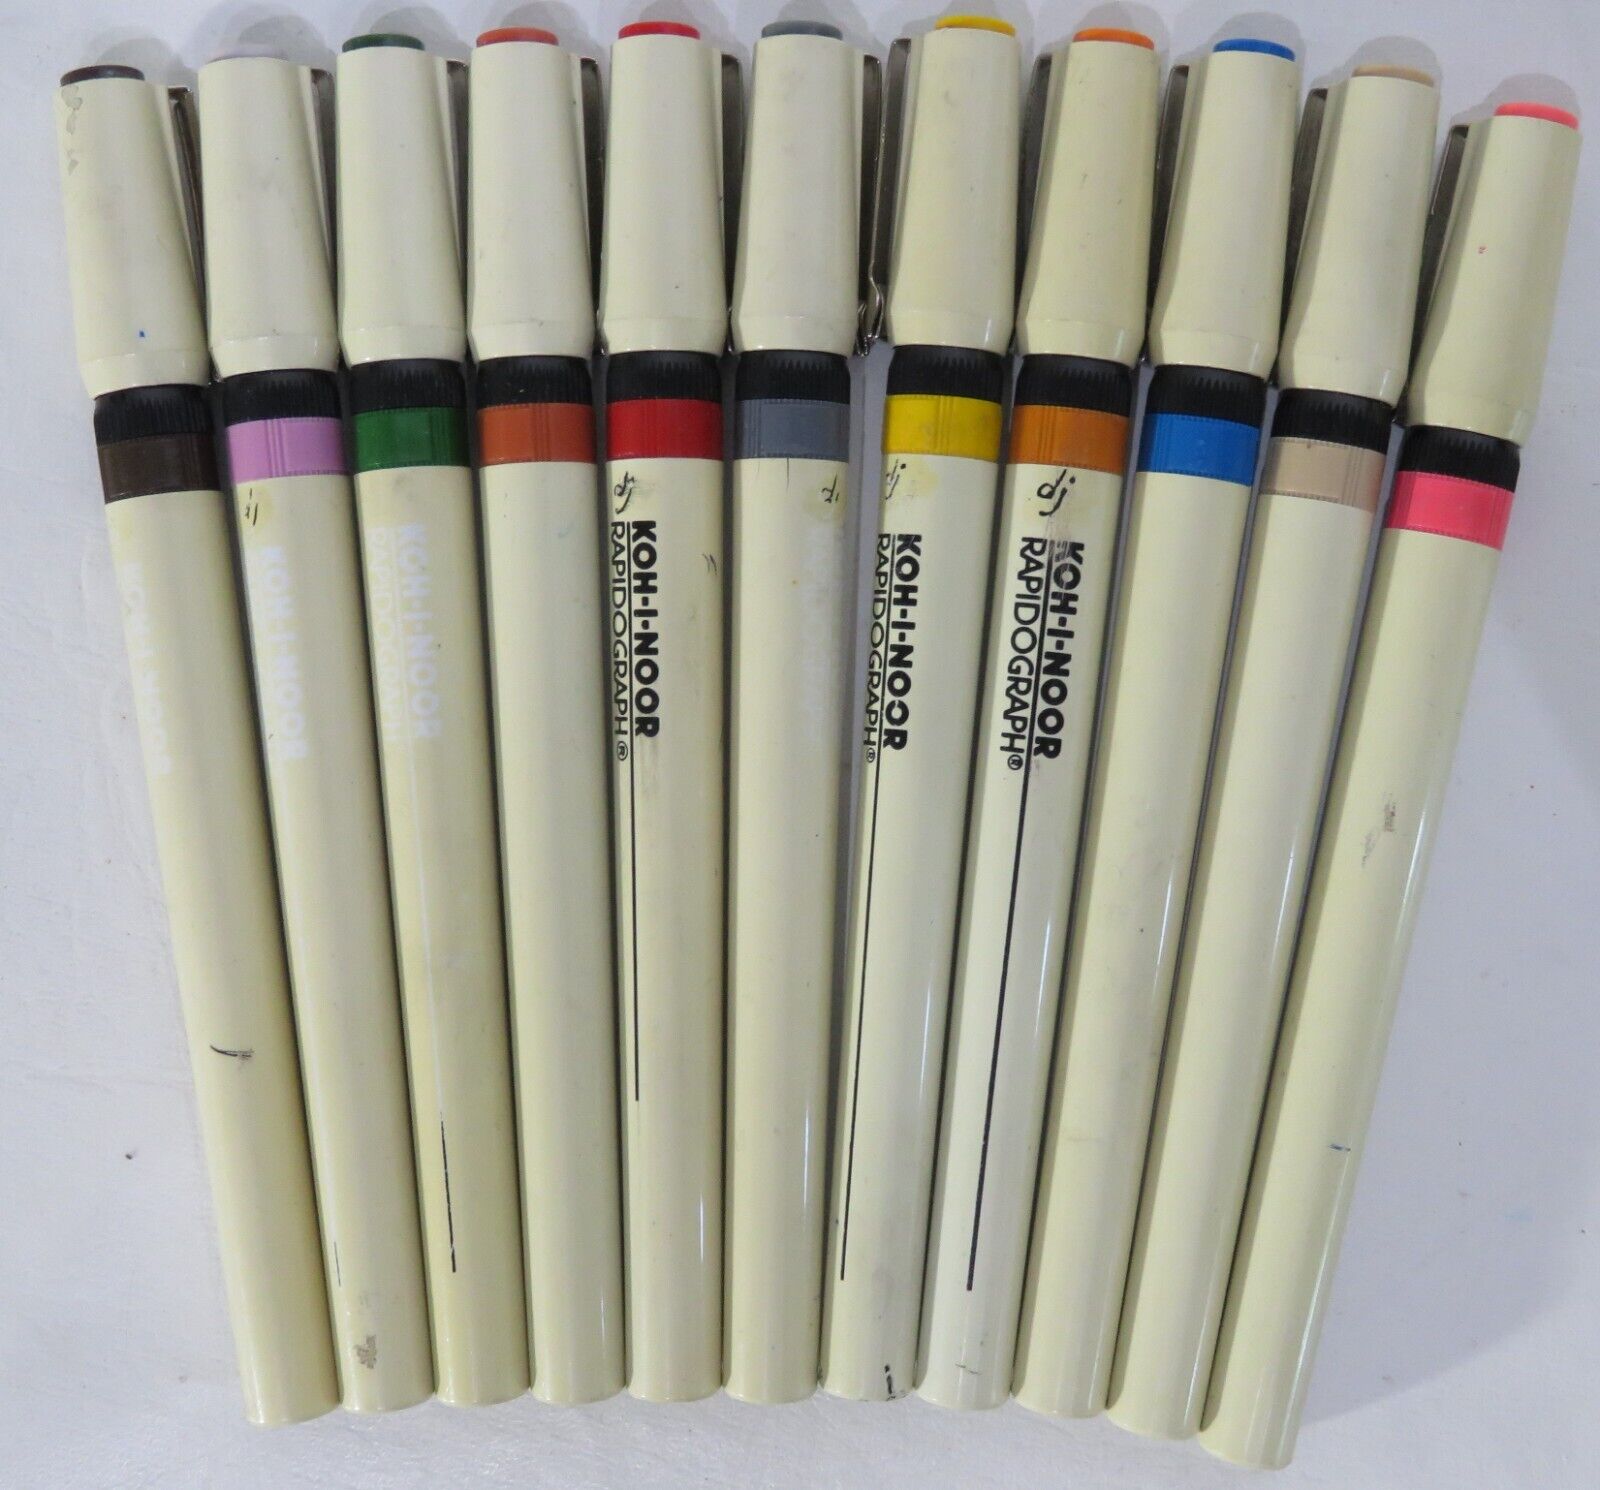 Vintage Koh-I-Noor Rapidograph Drafting Pens Lot of 11 No Ink Made in USA